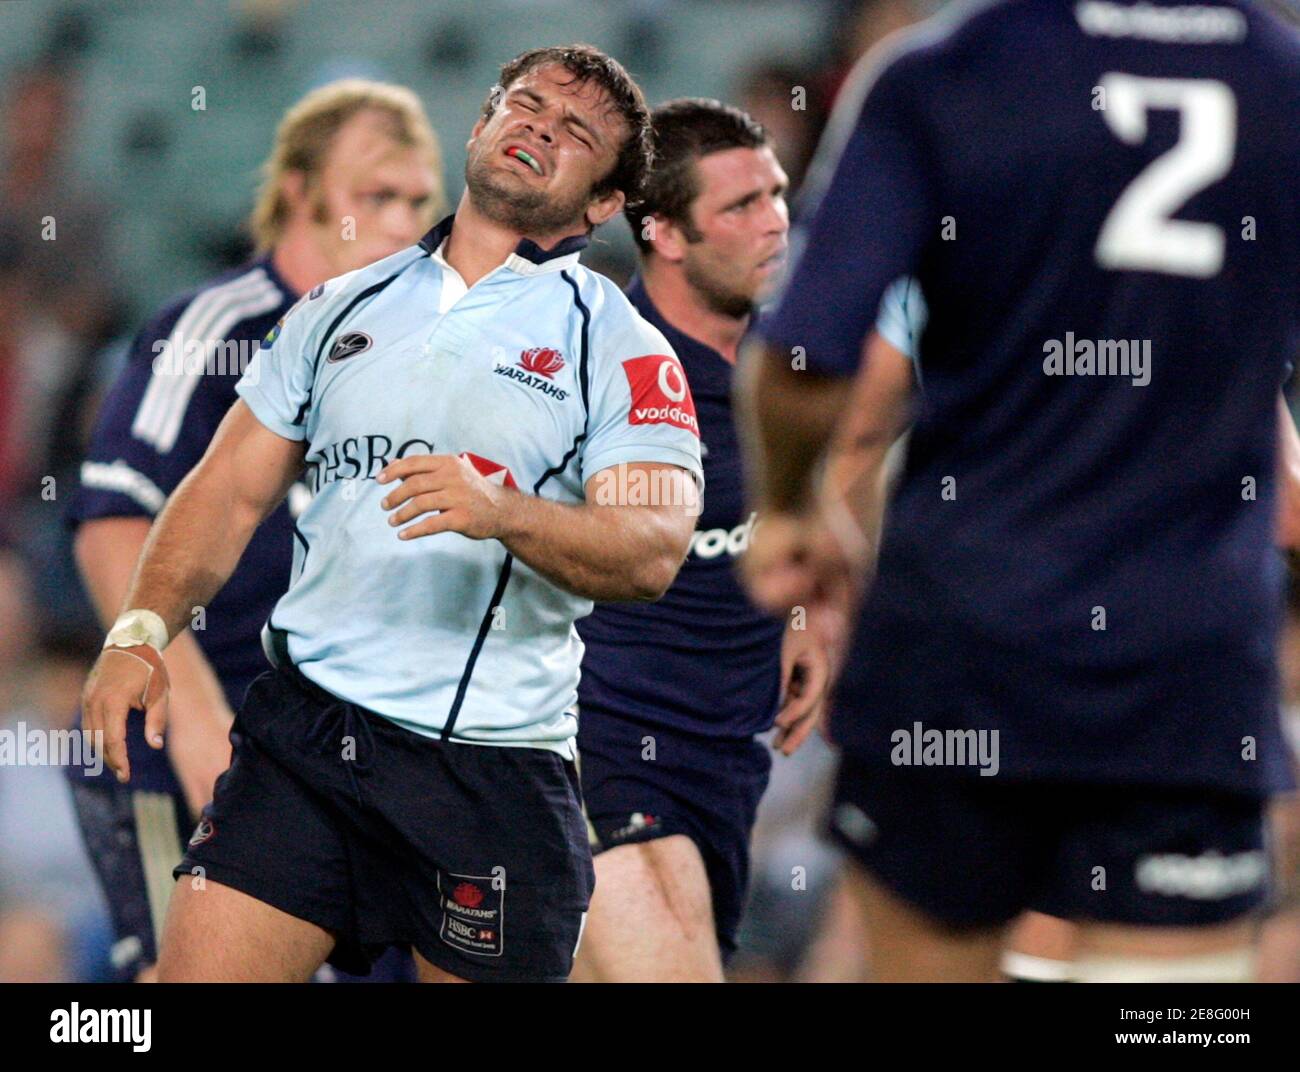 Captain of the Waratahs Adam Freier (2nd-L) reacts after a mistake during his team's loss to the Stormers of South Africa in their Super 14 rugby union match in Sydney March 17, 2007. REUTERS/Will Burgess   (AUSTRALIA) Stock Photo